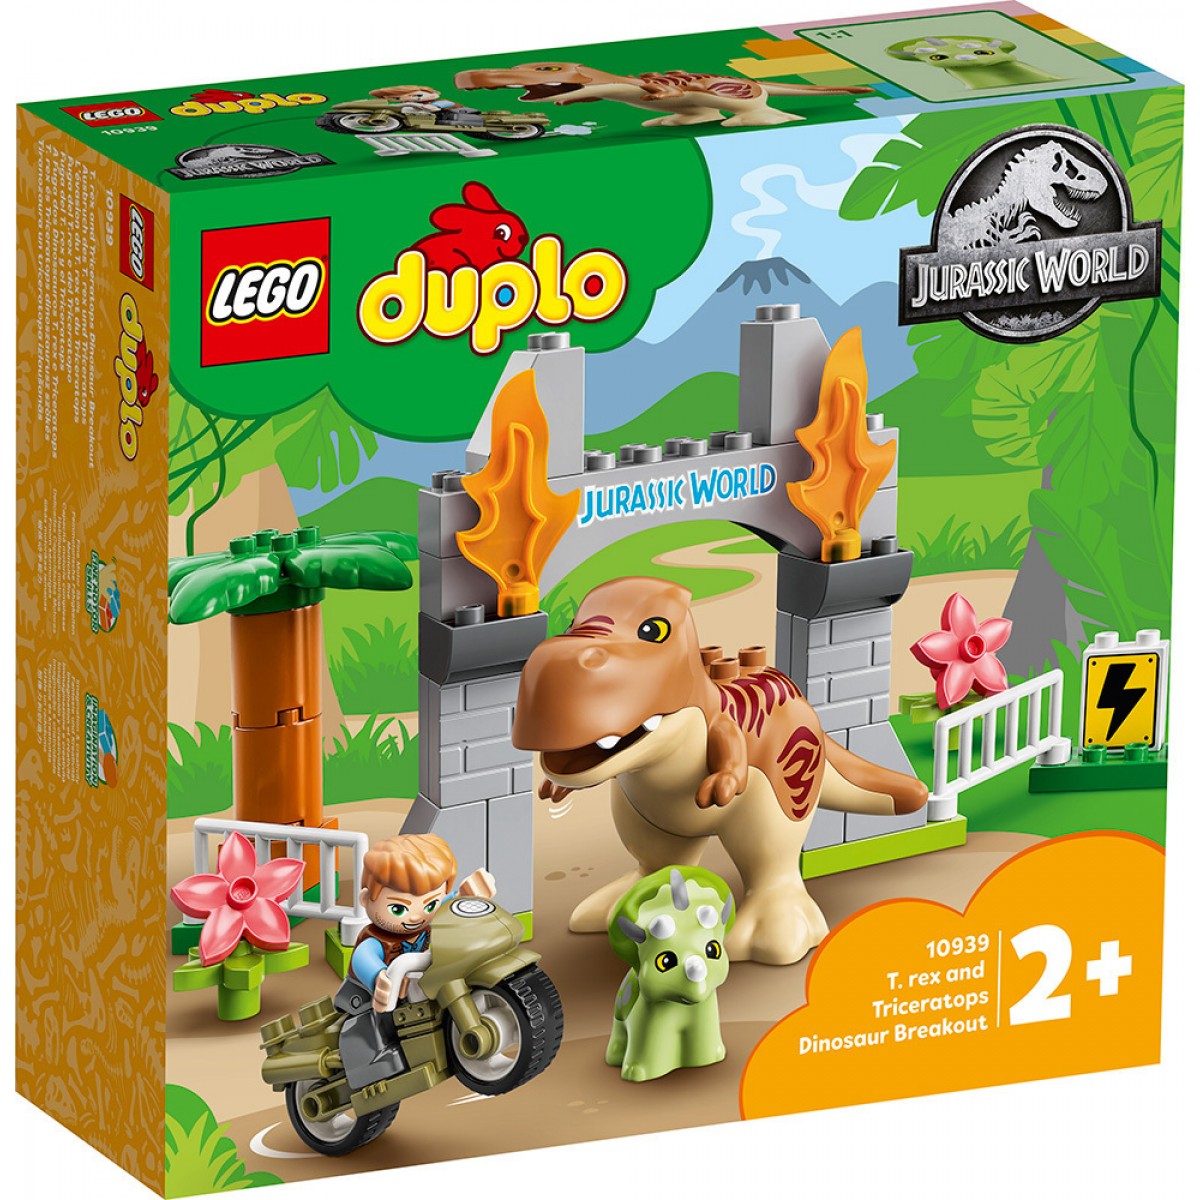 LEGO DUPLO 10939 T-REX AND TRICERATOPS DINOSAUR BREAKOUT